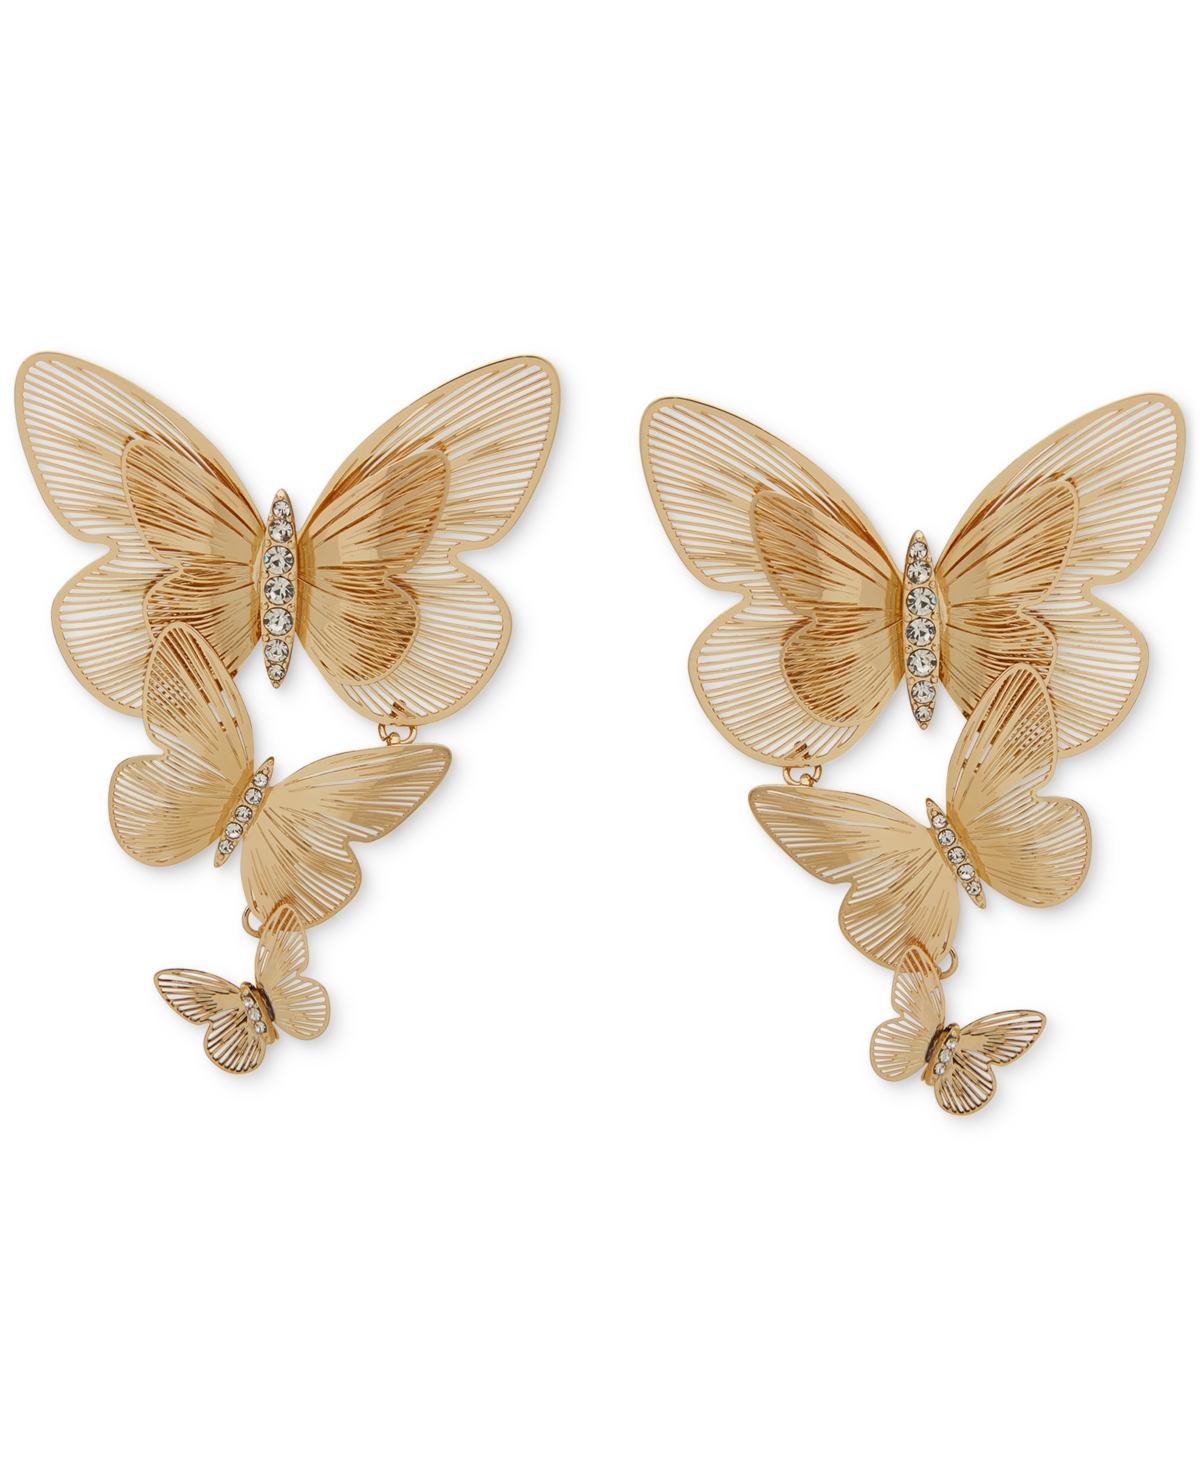 Gold-Tone Pave Butterfly Statement Earrings - Crystal Wh